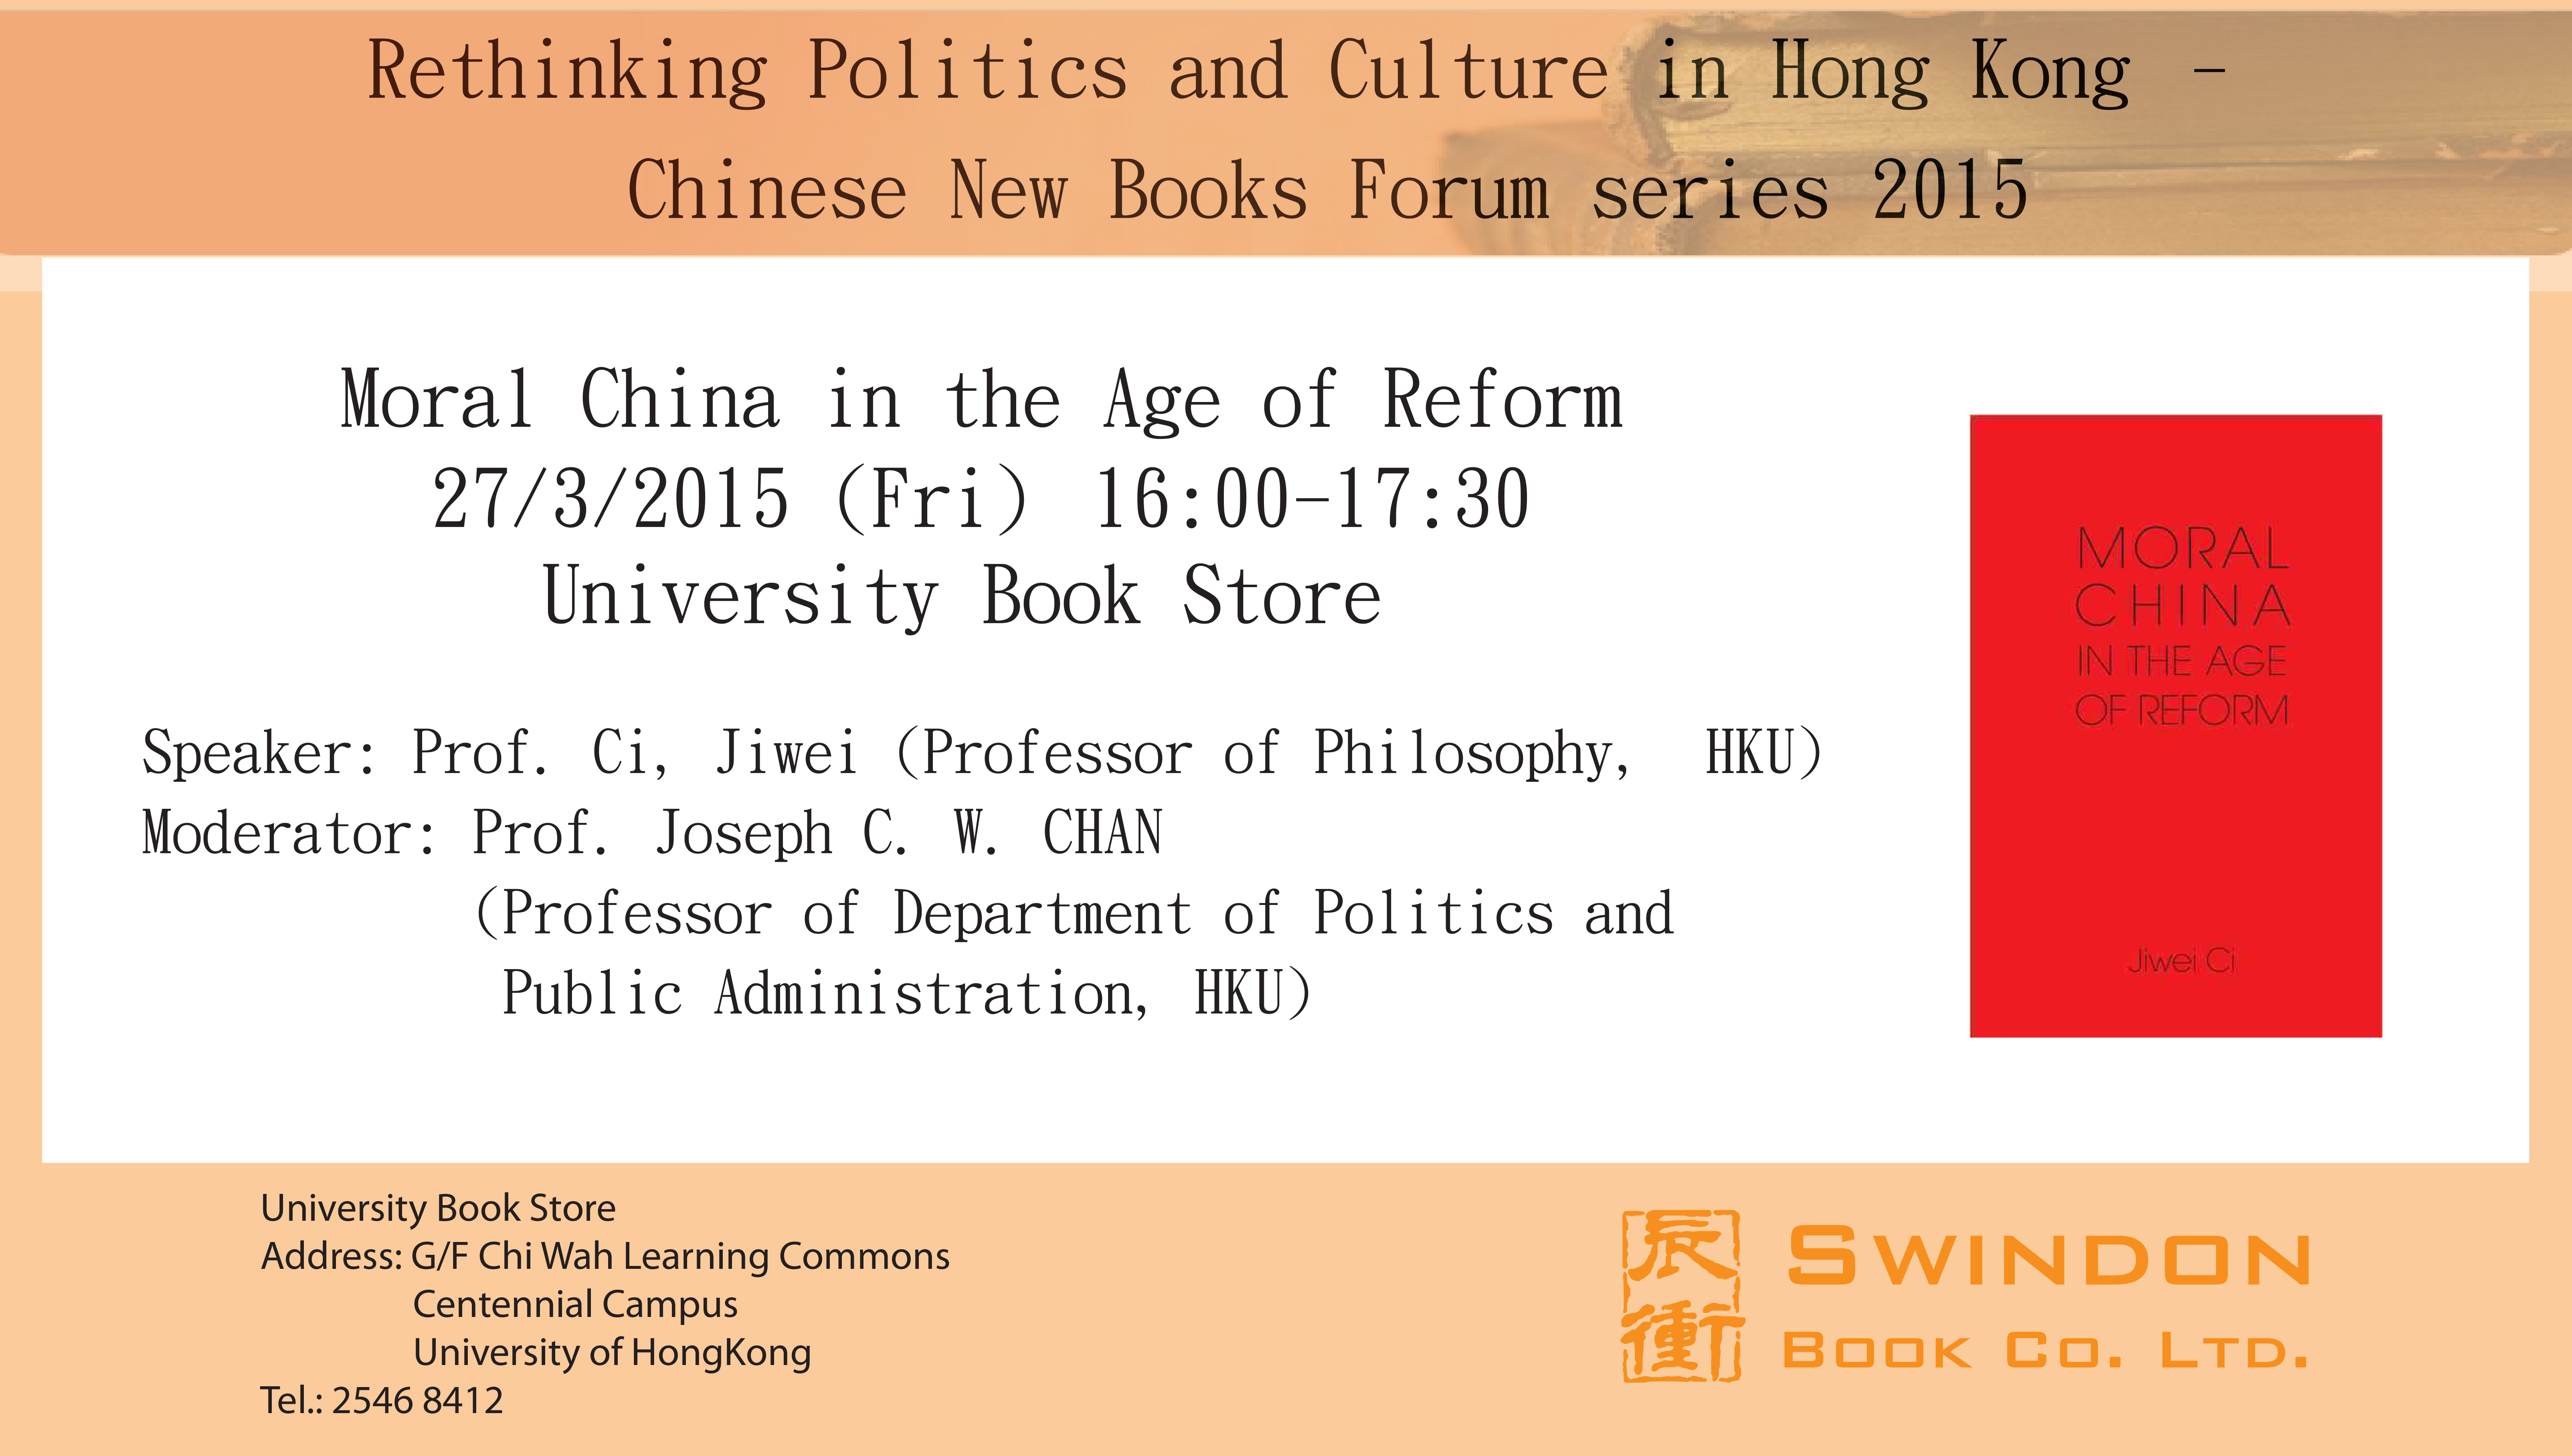 Chinese New Books Forum - Moral China in the Age of Reform